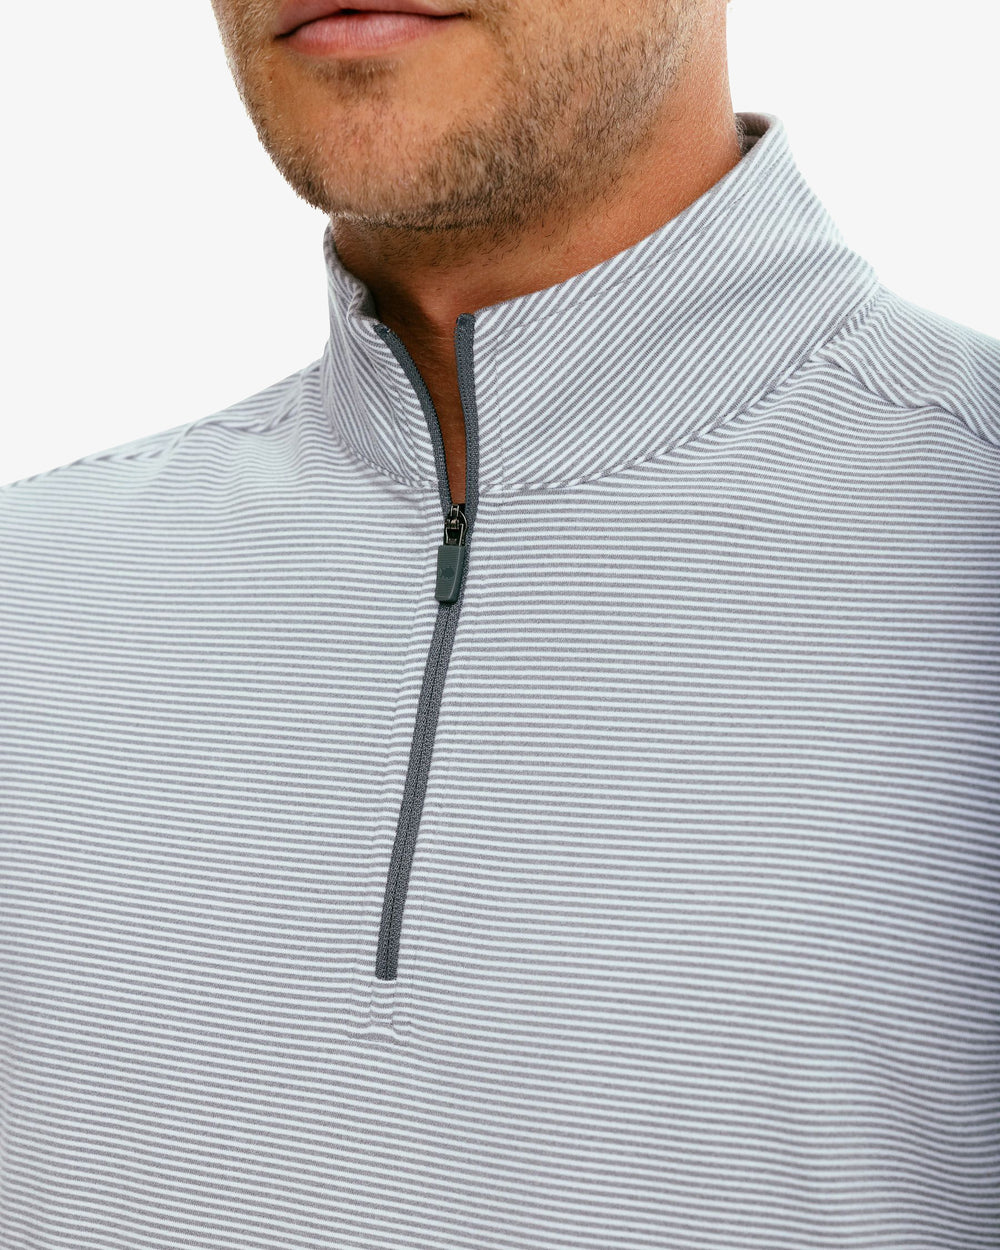 The detail of the Men's Cruiser Heather Micro Striped Performance Quarter Zip Pullover by Southern Tide - Heather Steel Grey